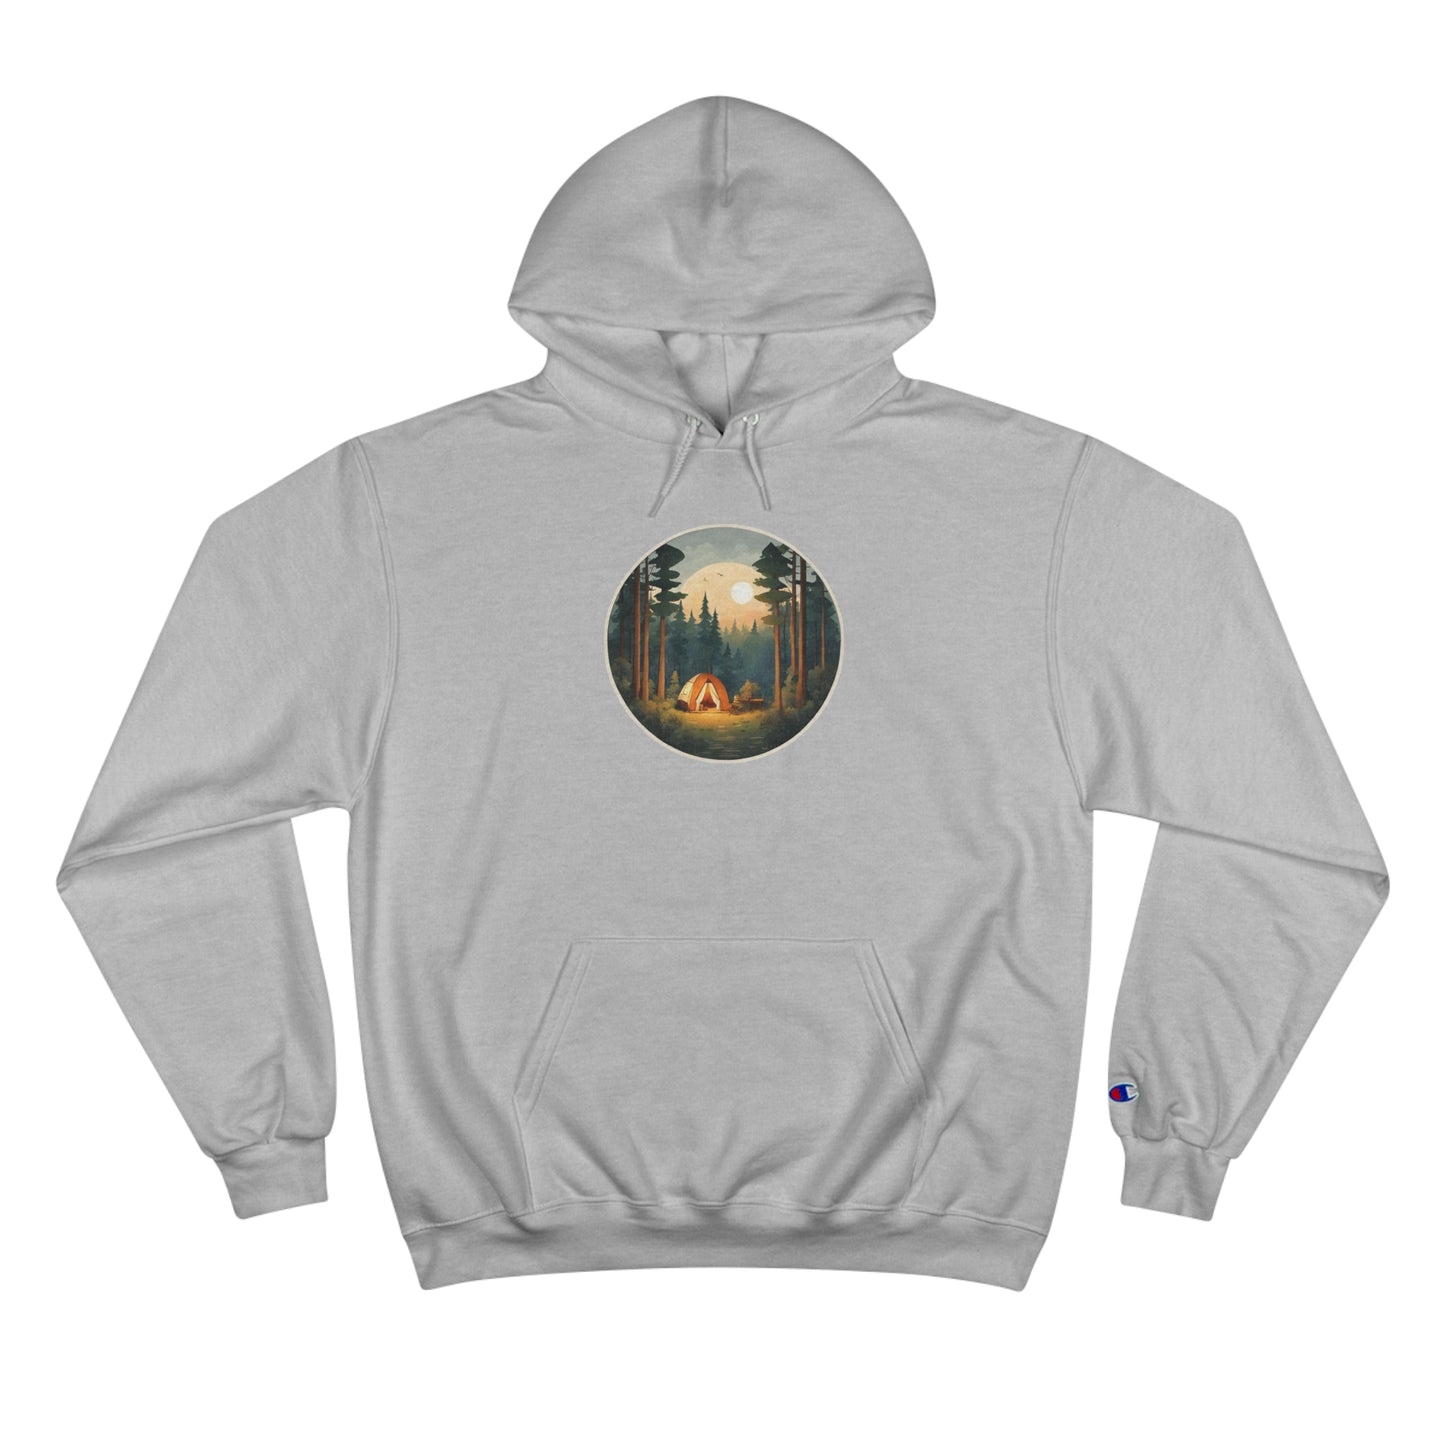 A design for those who are one with nature when they go camping with front and back designs! On this great Champion Hoodie. Enjoy!